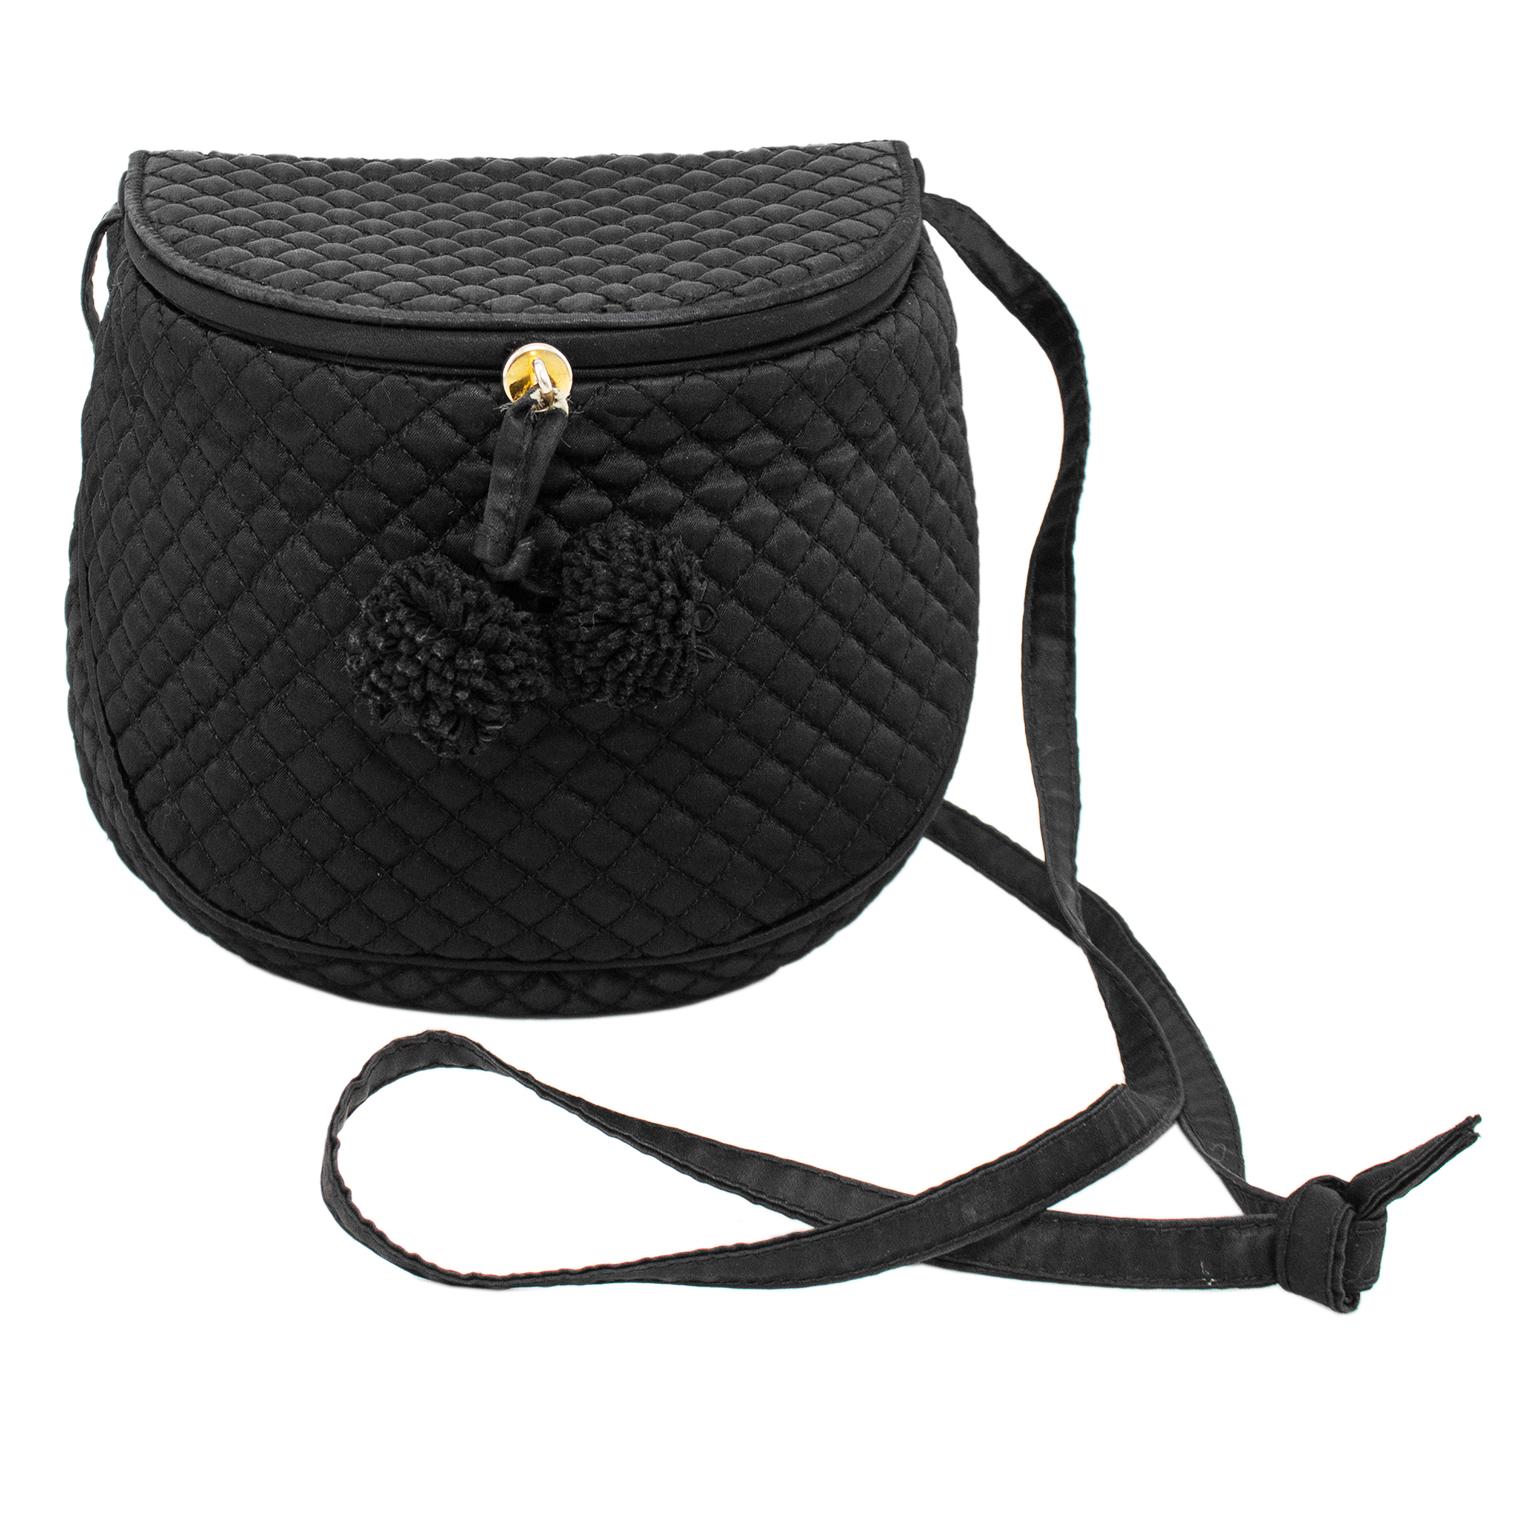 Lovely Bottega Veneta mailbag from the 1990s. Black quilted satin with black top stitching. Demi lune shape with two black pom poms. Black satin interior. The long, thin black strap can be used on the shoulder or crossbody, or it can be pulled